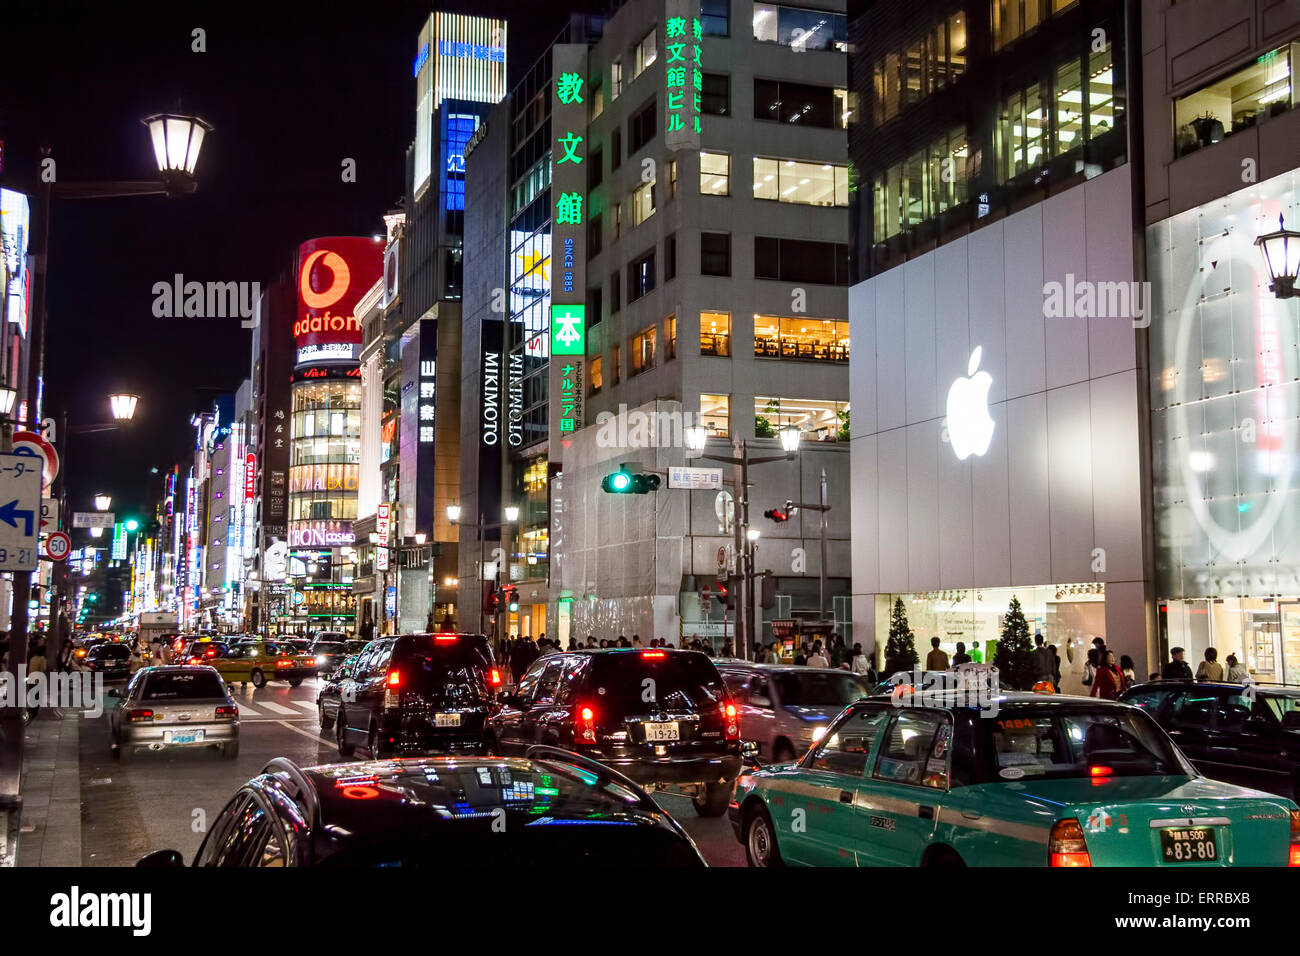 The Ginza at night. View along traffic filled street with the Apple ...